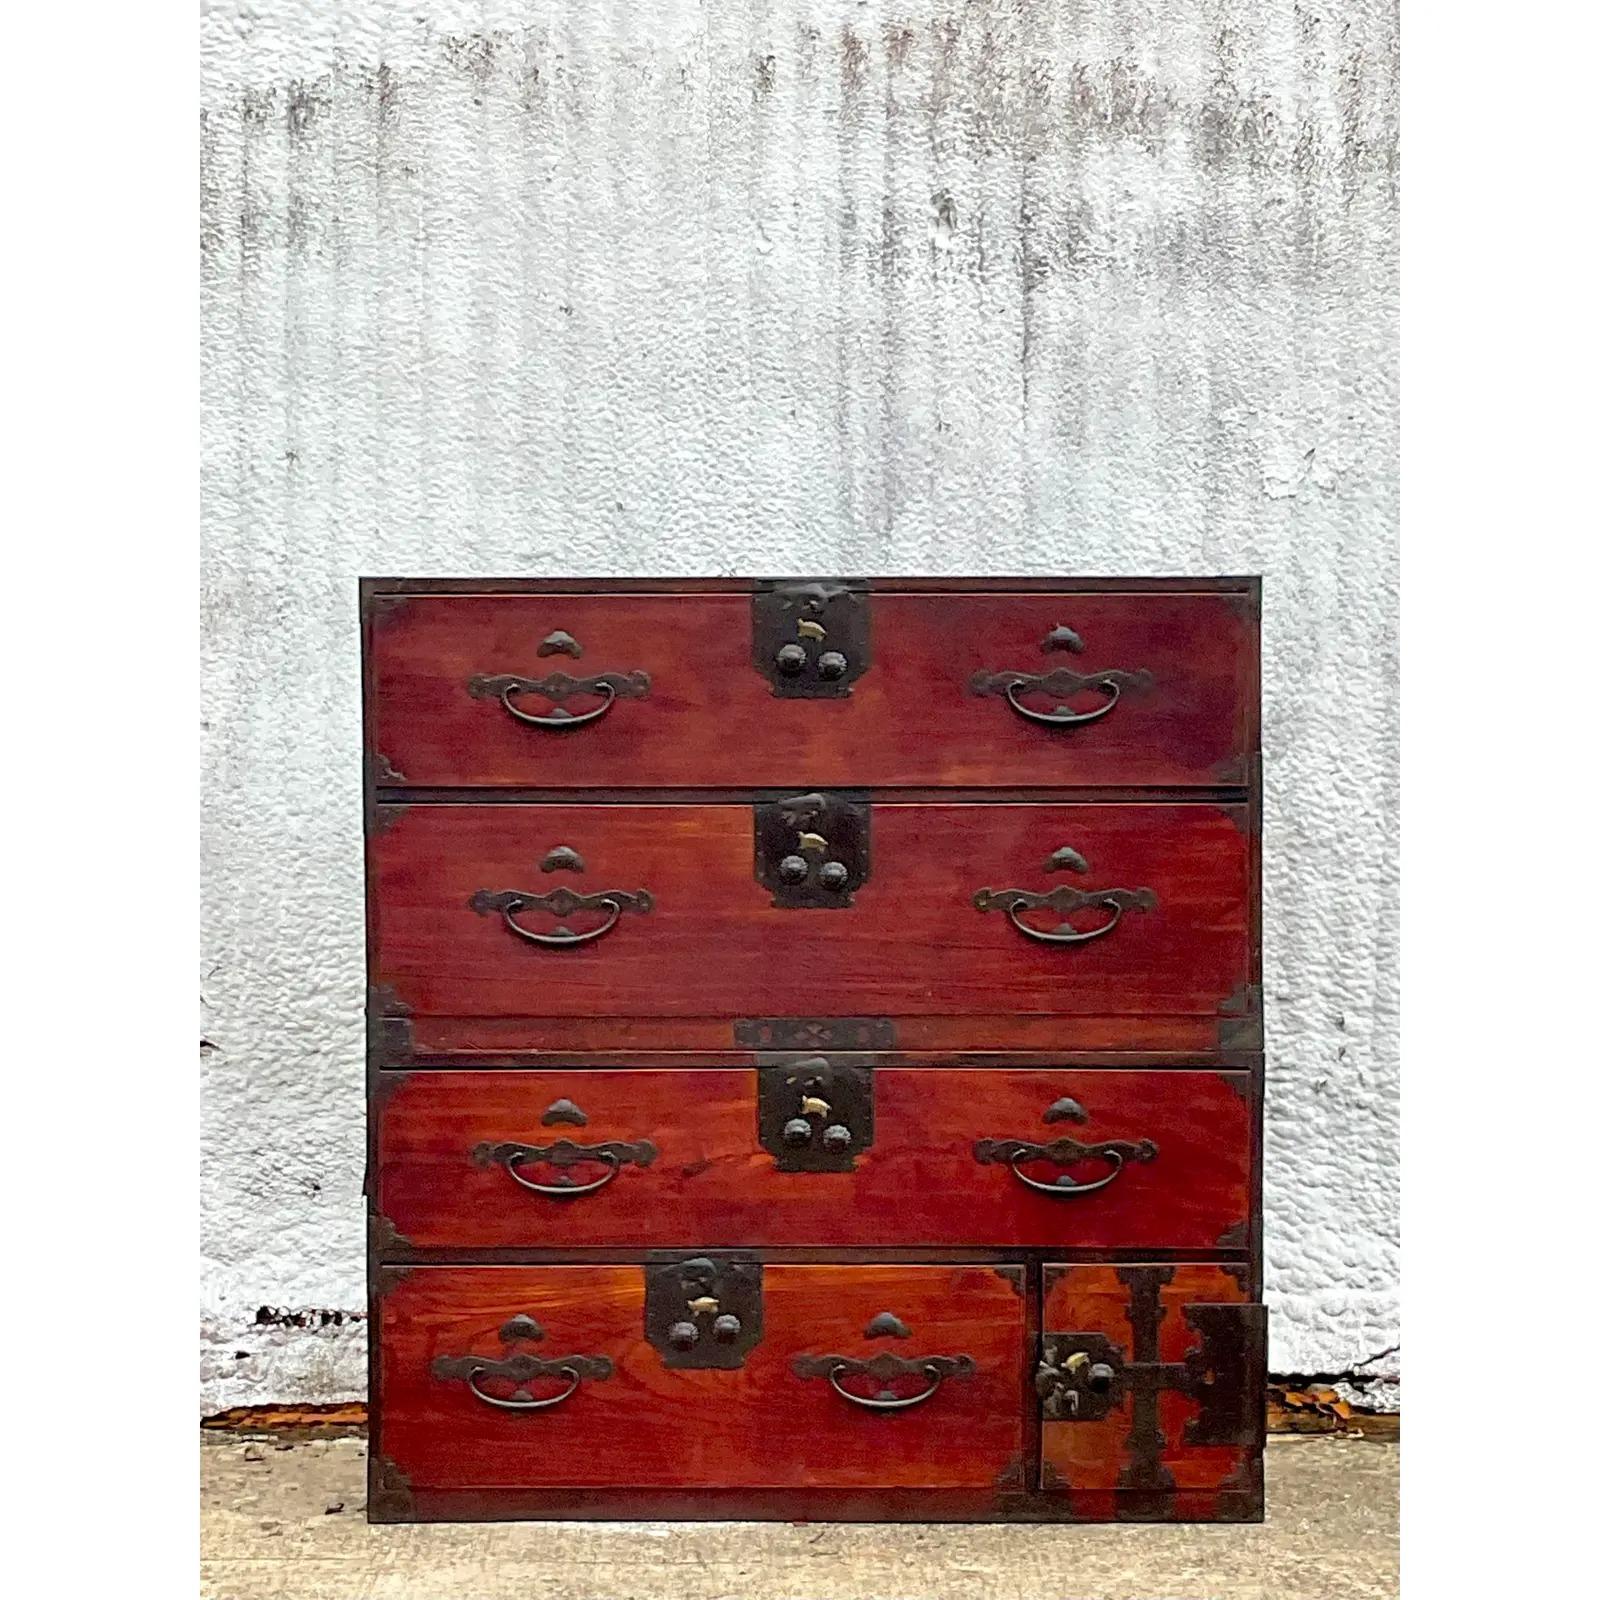 A striking vintage pair of stacking Asian chests. The iconic Tansu cabinet with lots is great heavy hardware. Gorgeous as separate nightstand or stack them for a gorgeous chest of drawers. Acquired from a Palm Beach estate.